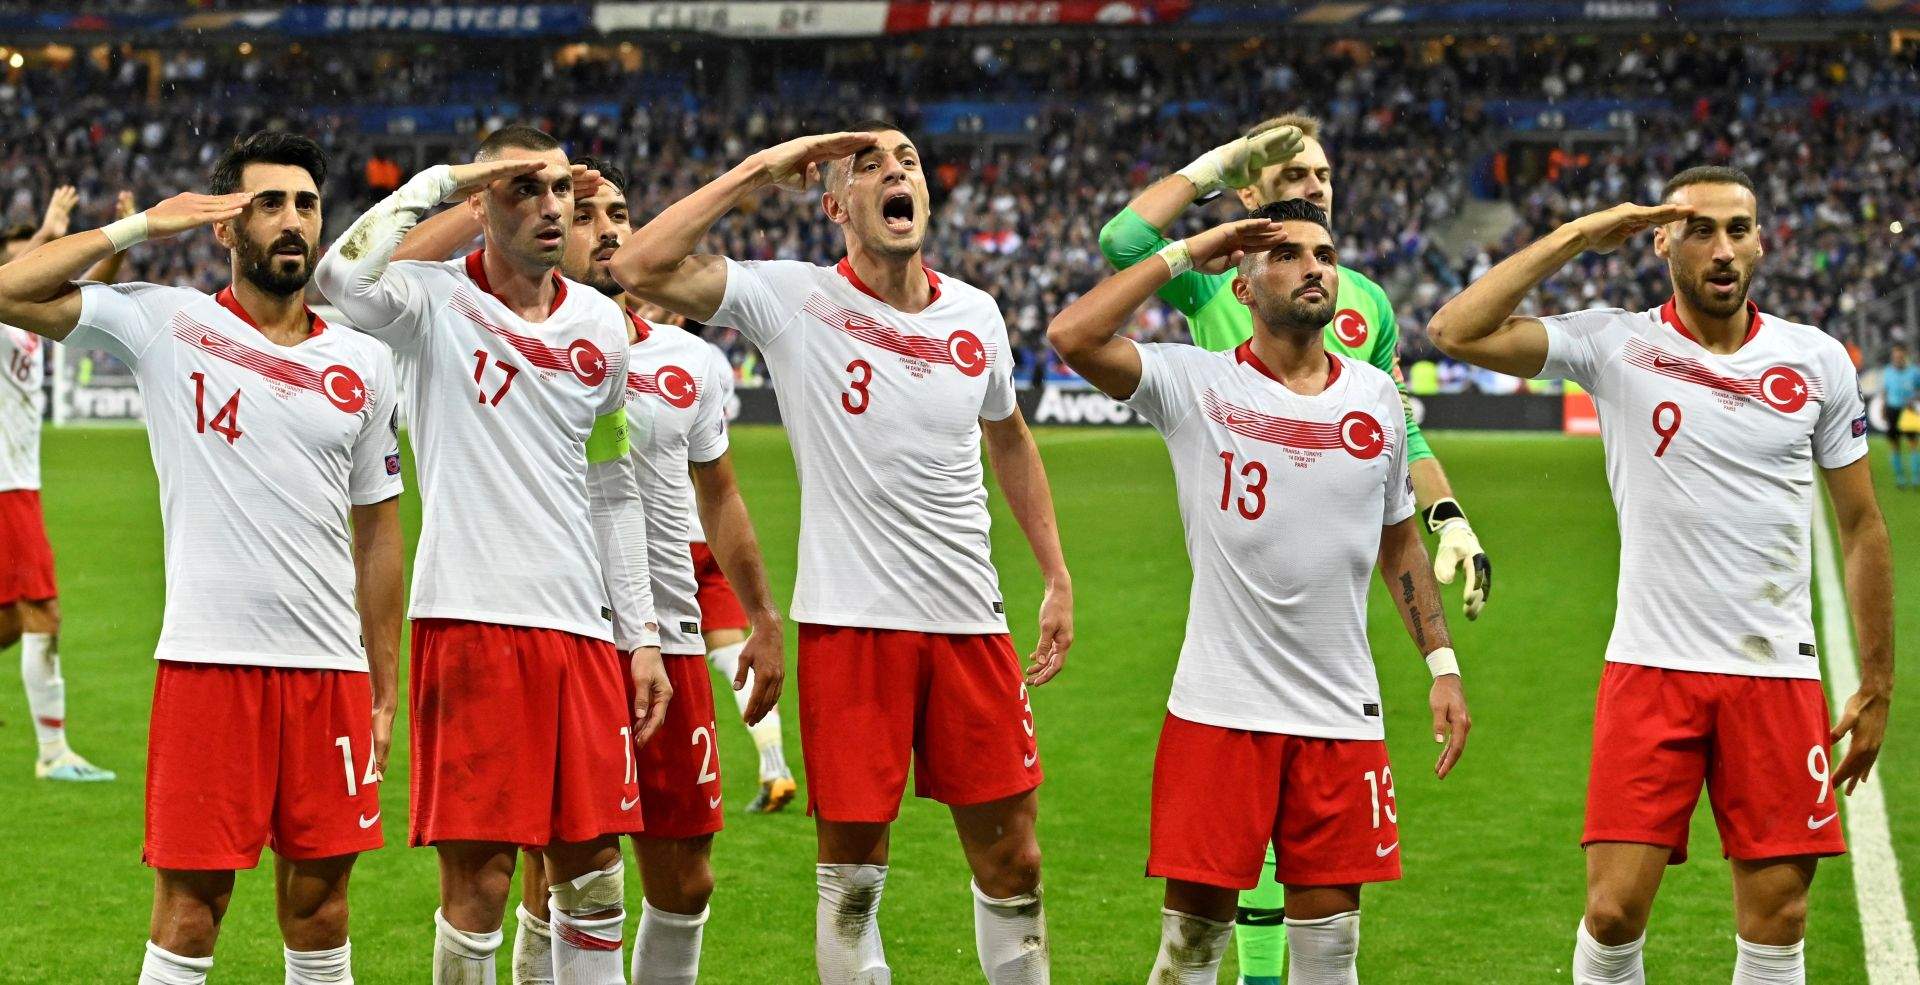 SAINT-DENIS, FRANCE - OCTOBER 13: Players of Turkey make a formal salute after Kaan Ayhan's goal during the UEFA EURO 2020 qualifier Group H soccer match between France and Turkey at Stade de France in Saint-Denis, France on October 13, 2019. Mustafa Yalcin / Anadolu Agency/ABACAPRESS.COM ELIMINACJE MISTRZOSTW EUROPY PILKA NOZNA MECZ FRANCJA VS TURCJA FOT. ABACA/NEWSPIX.PL POLAND ONLY! --- Newspix.pl *** Local Caption *** www.newspix.pl mail us: info@newspix.pl call us: 0048 022 23 22 222 --- Polish Picture Agency by Ringier Axel Springer Poland